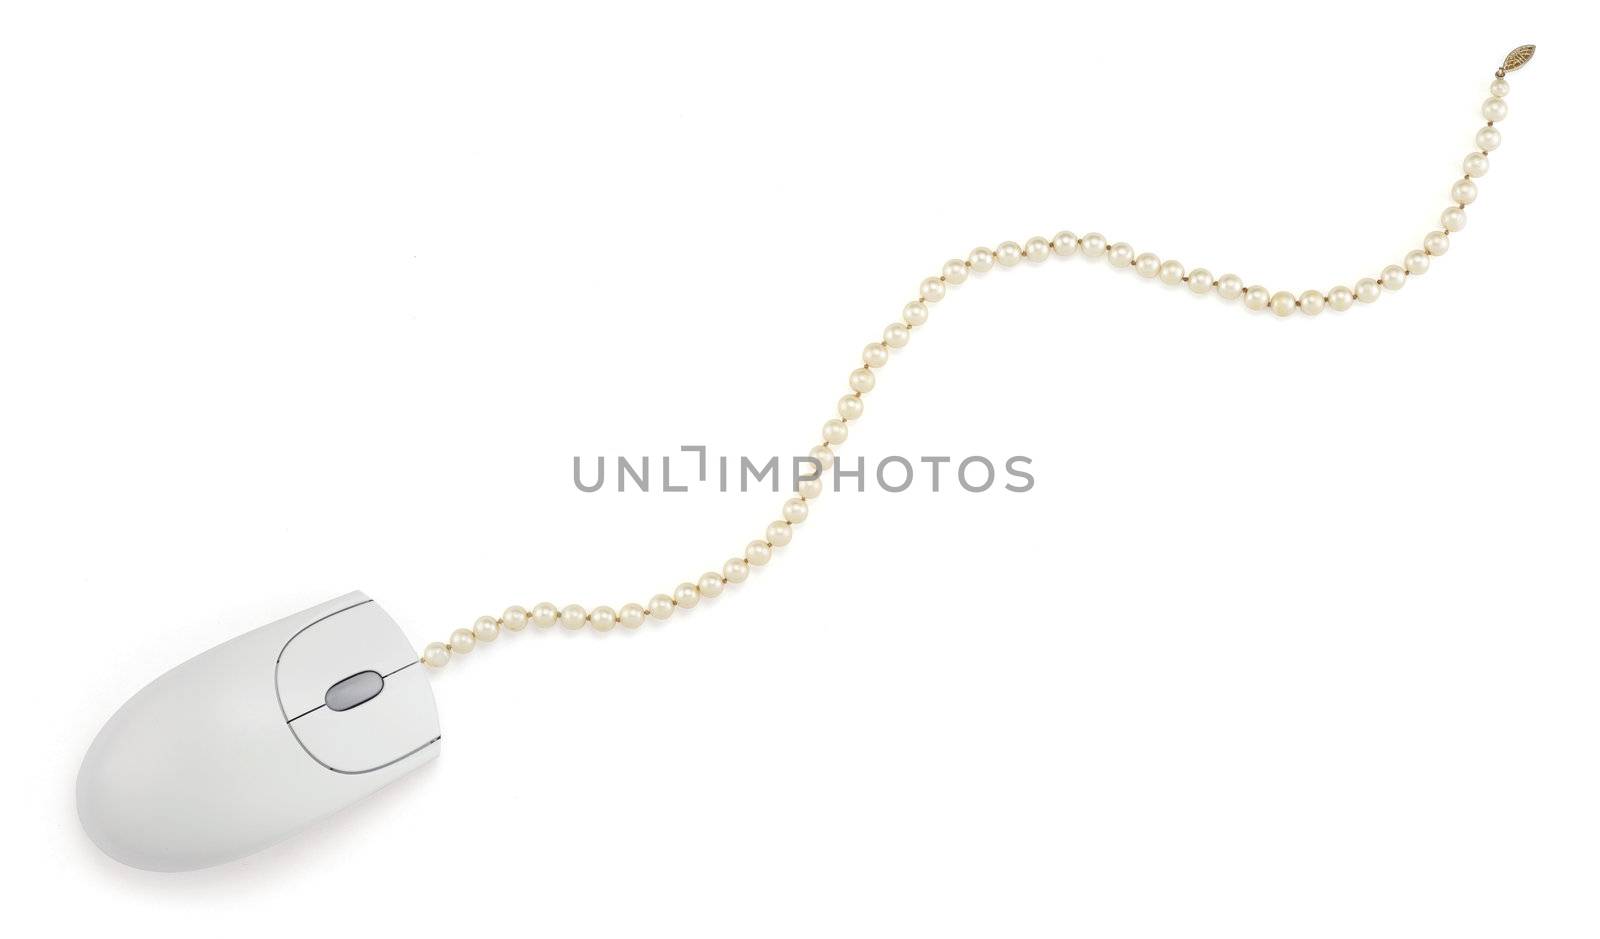 A computer mouse with its cable replaced with a string of fake pearls isolated on white with clipping path.